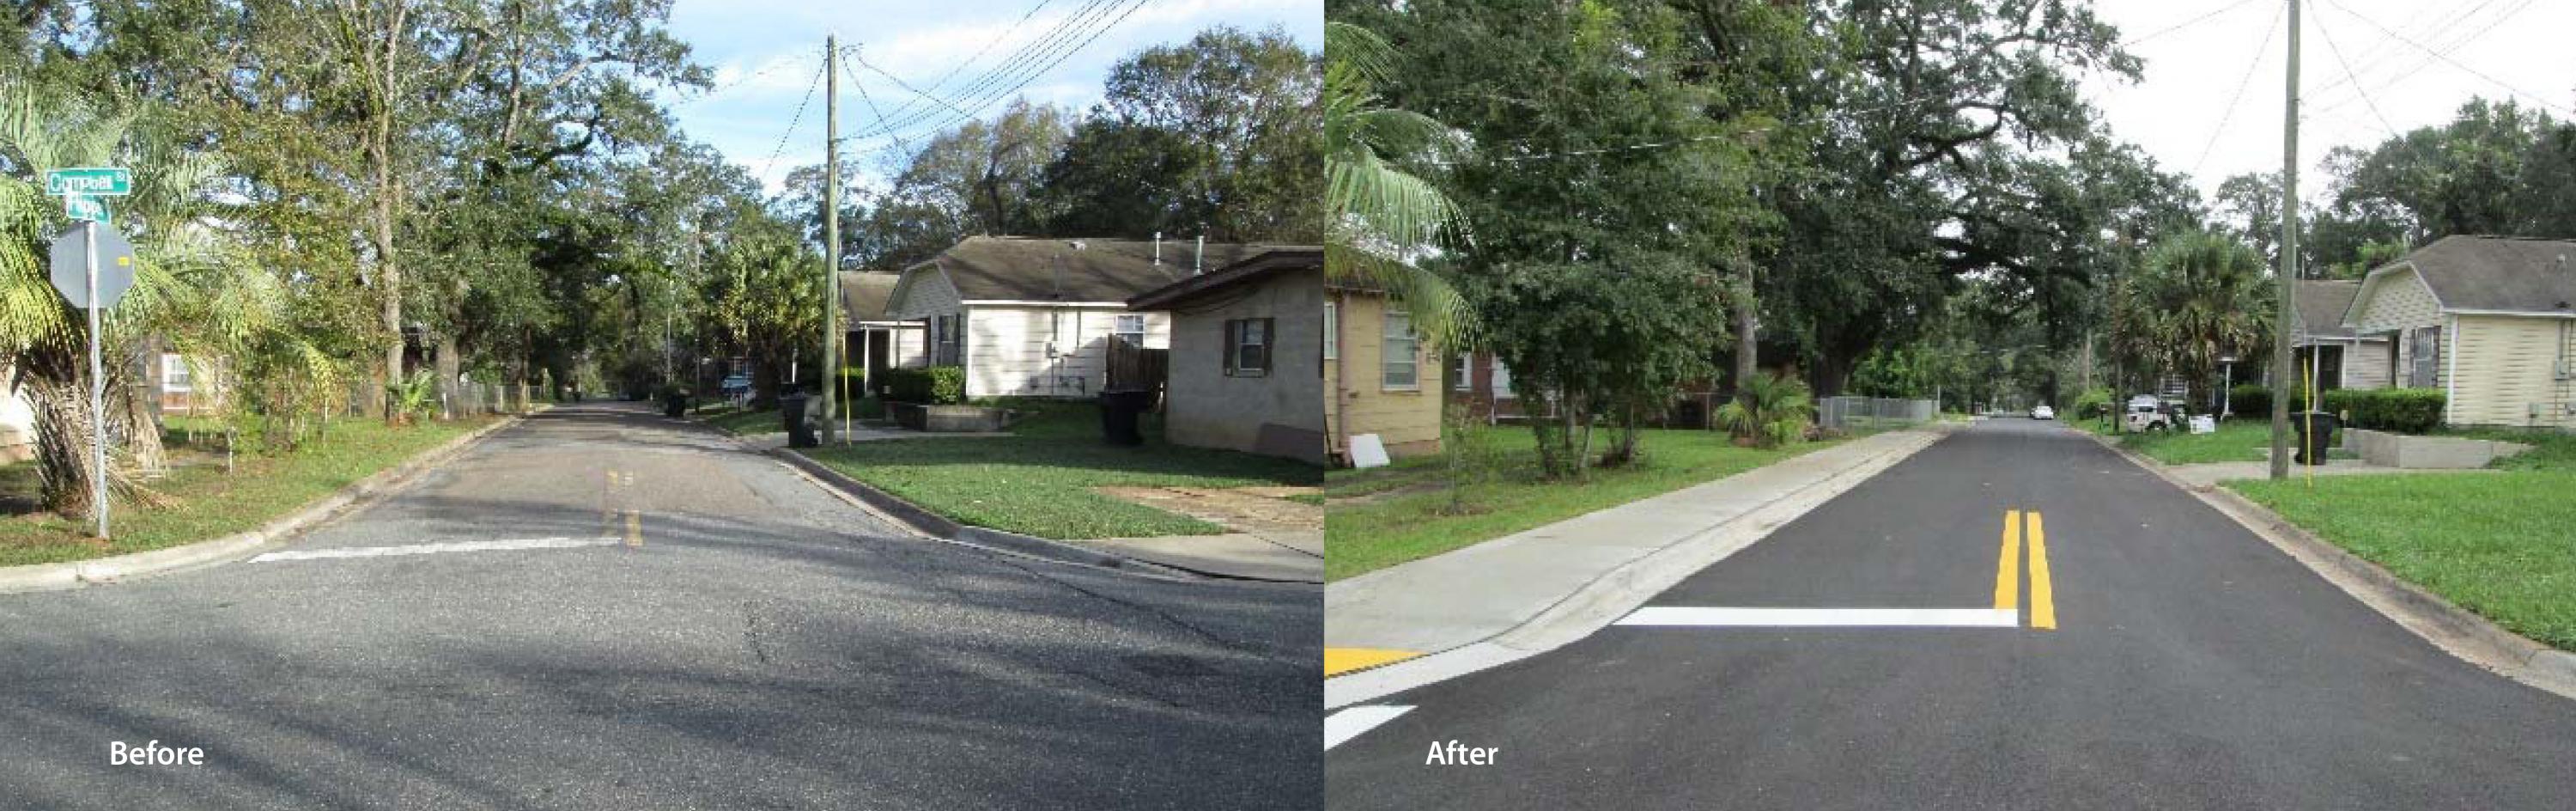 Flipper Street Before And After Website Photo